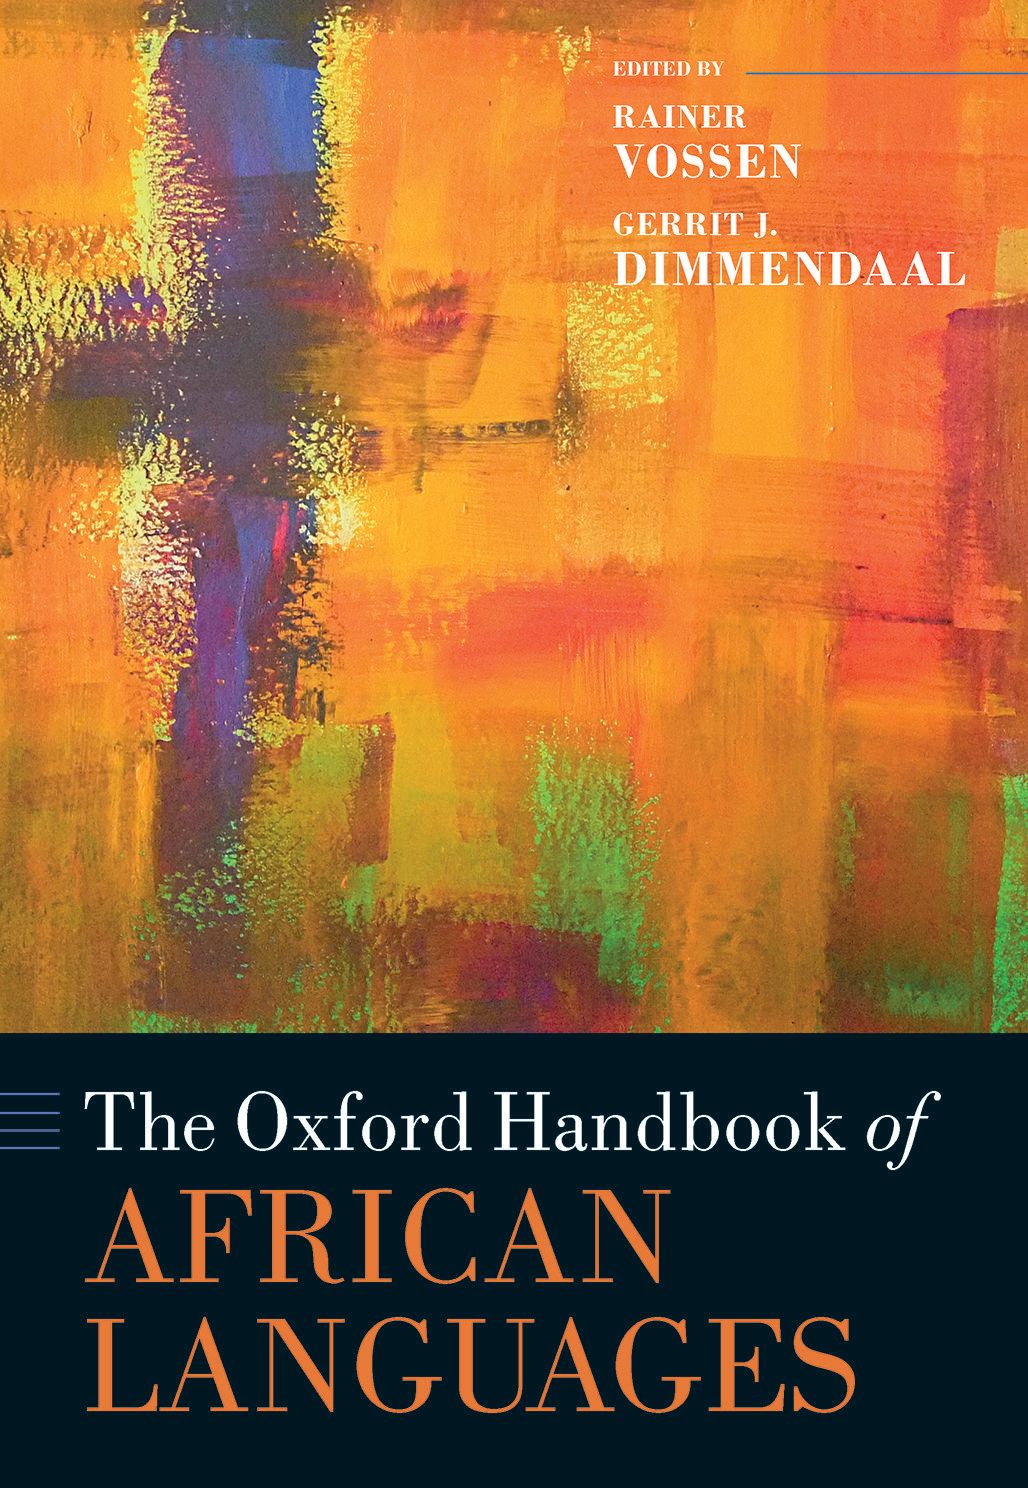 The Oxford Handbook of African Languages – eBook PDF